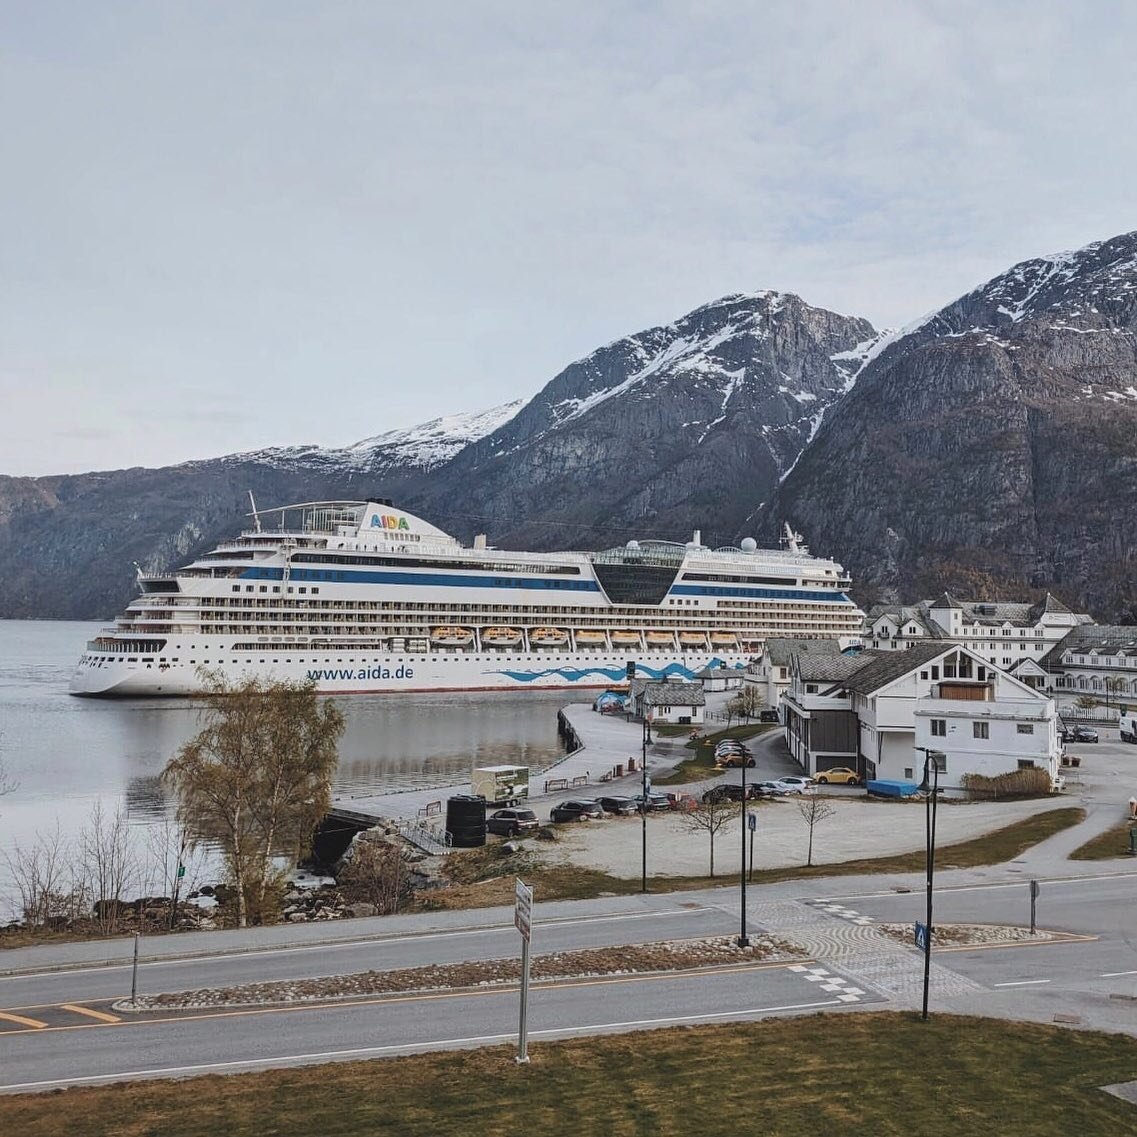 Finallyyyyy!!!! The most beautiful smile of the SEA back in Eidfjord!!!
First Aida call this season with our beauty AIDA Diva 🫶🏻Thanks to all the lovely guests for visiting us and welcome back start of May #aidadiva ⚓️🛳💙❤️💚💛

#norsknatursenter 